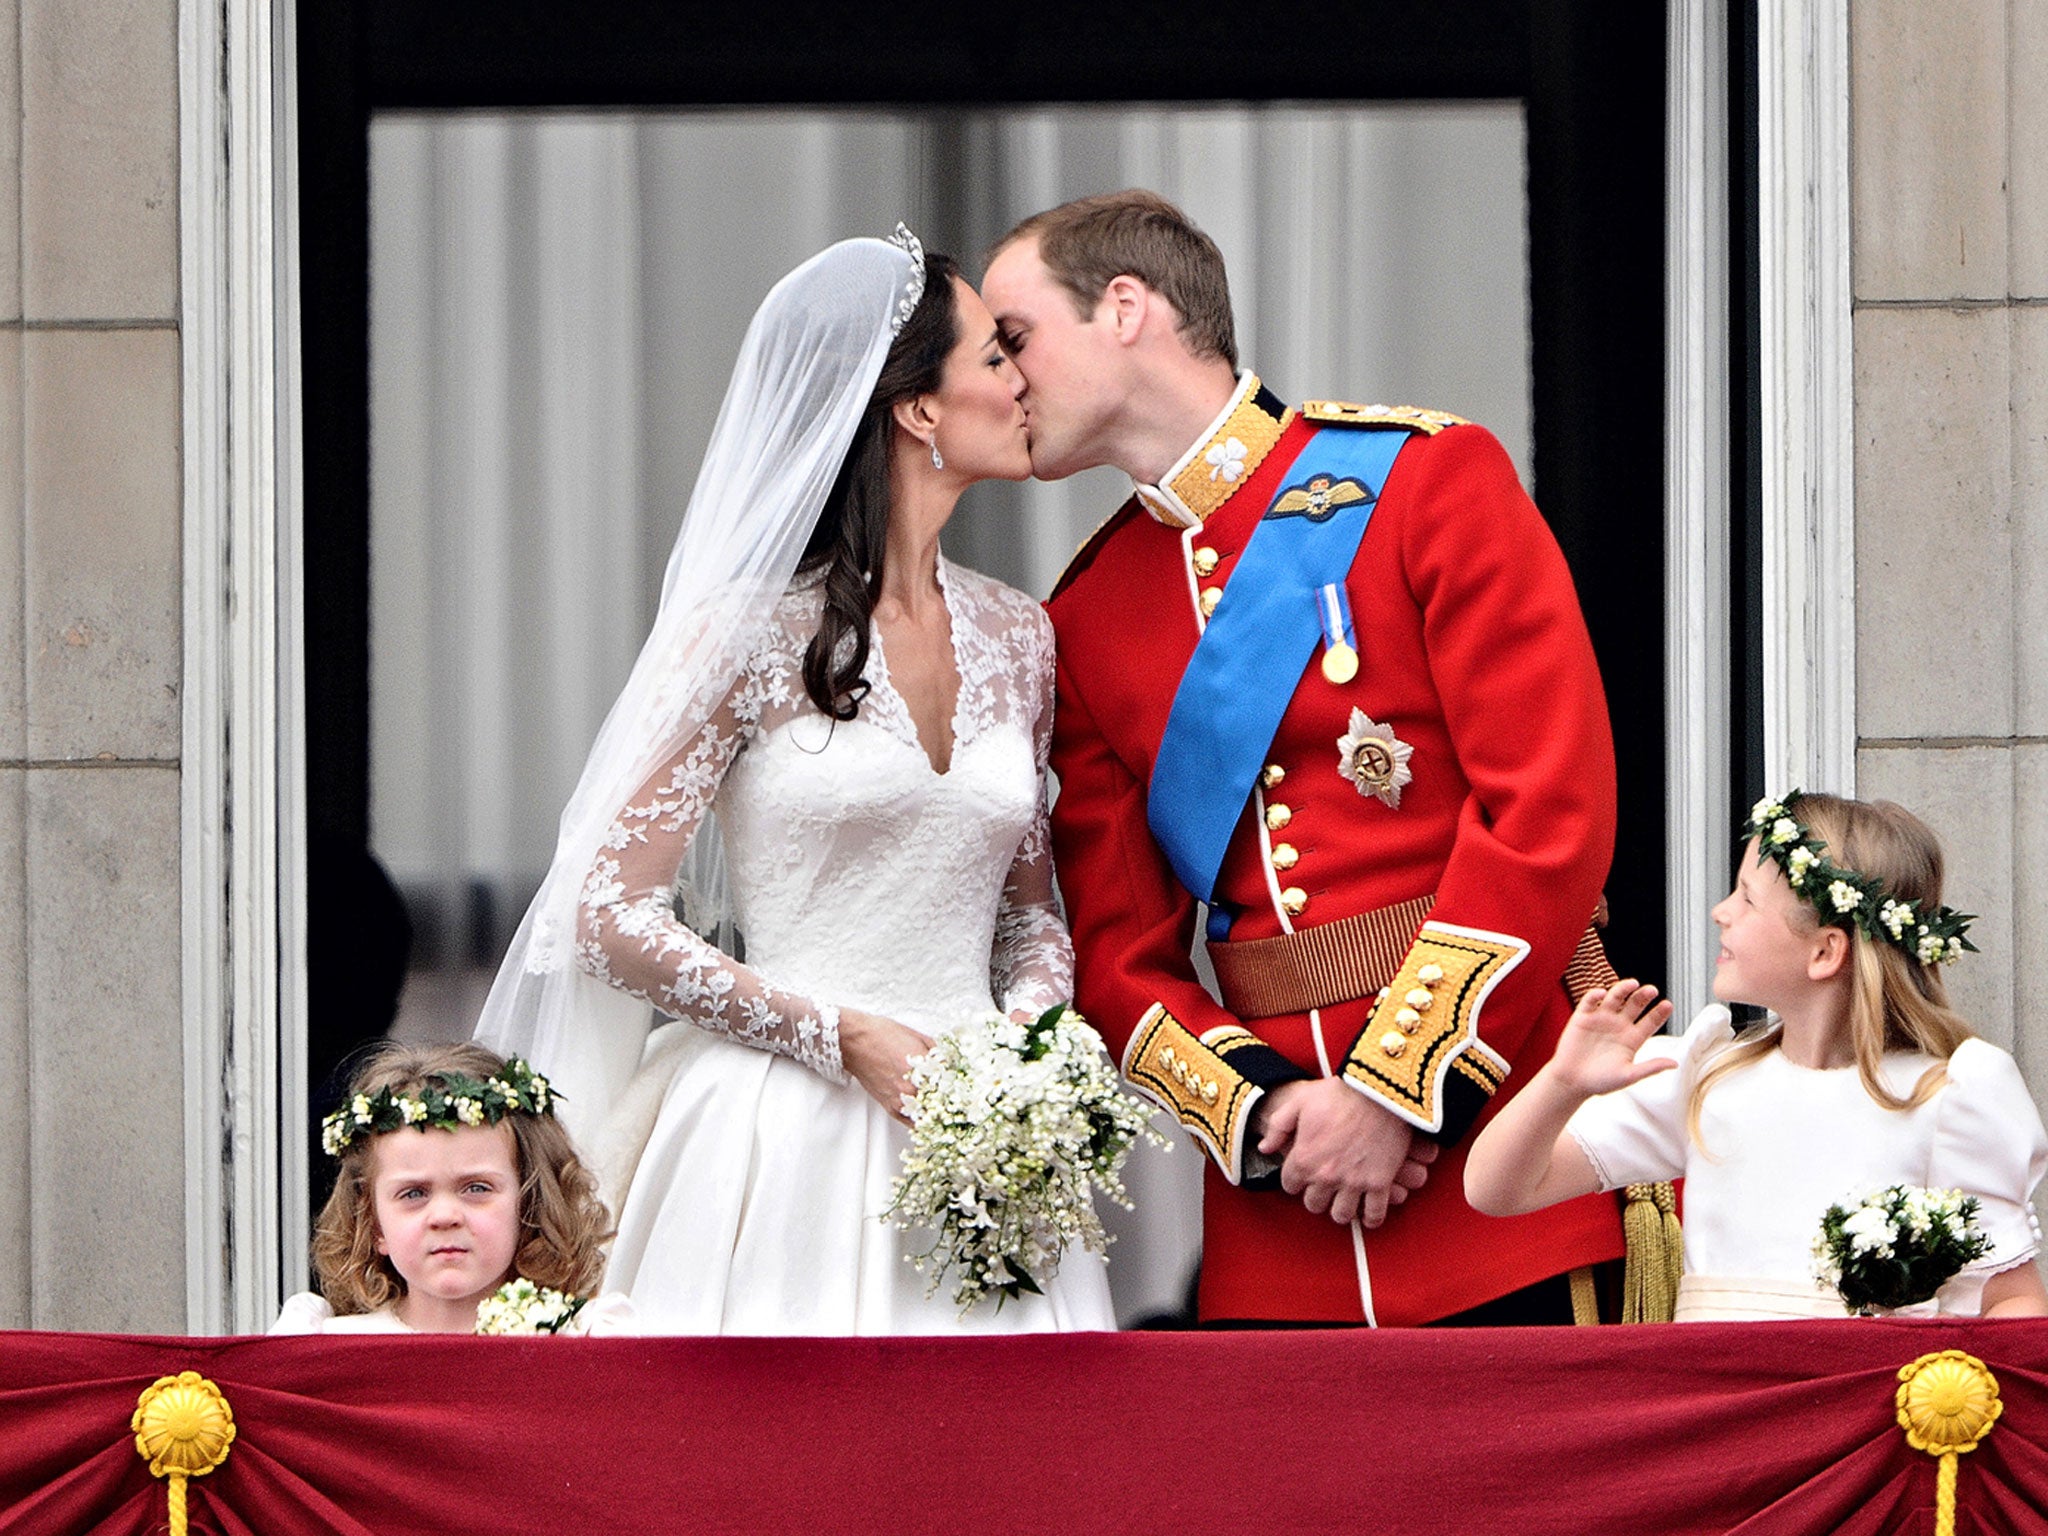 Prince William and Kate, Duchess of Cambridge, on the balcony of Buckingham Palace, after their wedding on April 29, 2011. Royal wedding protesters lost their court appeal on Wednesday 22 January after they accused the Metropolitan Police of "suppressing